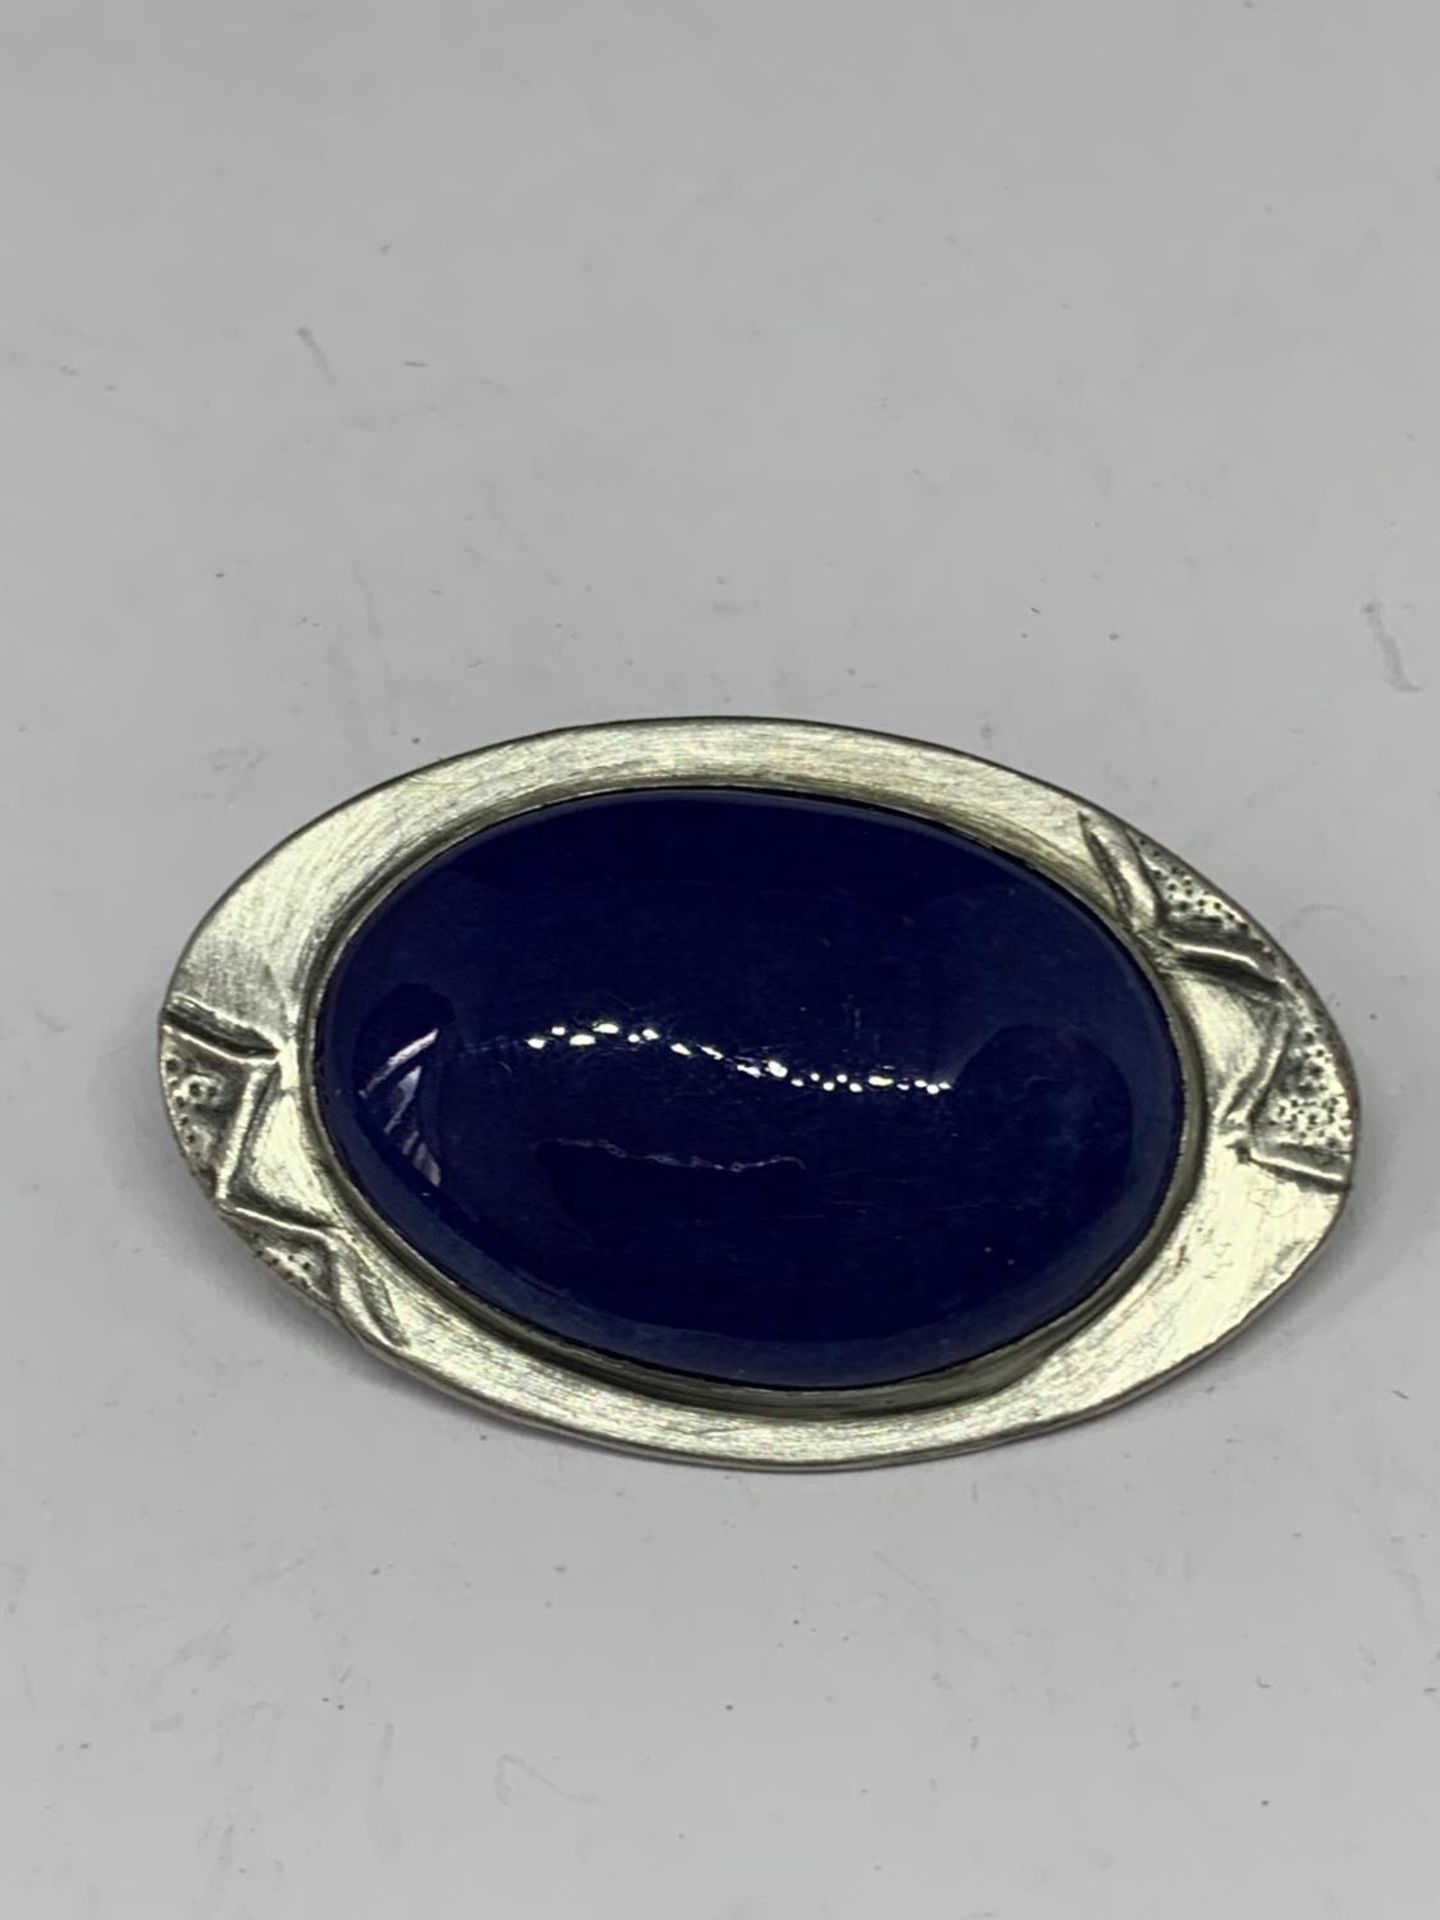 A PEWTER ARTS AND CRAFTS RUSKIN BROOCH